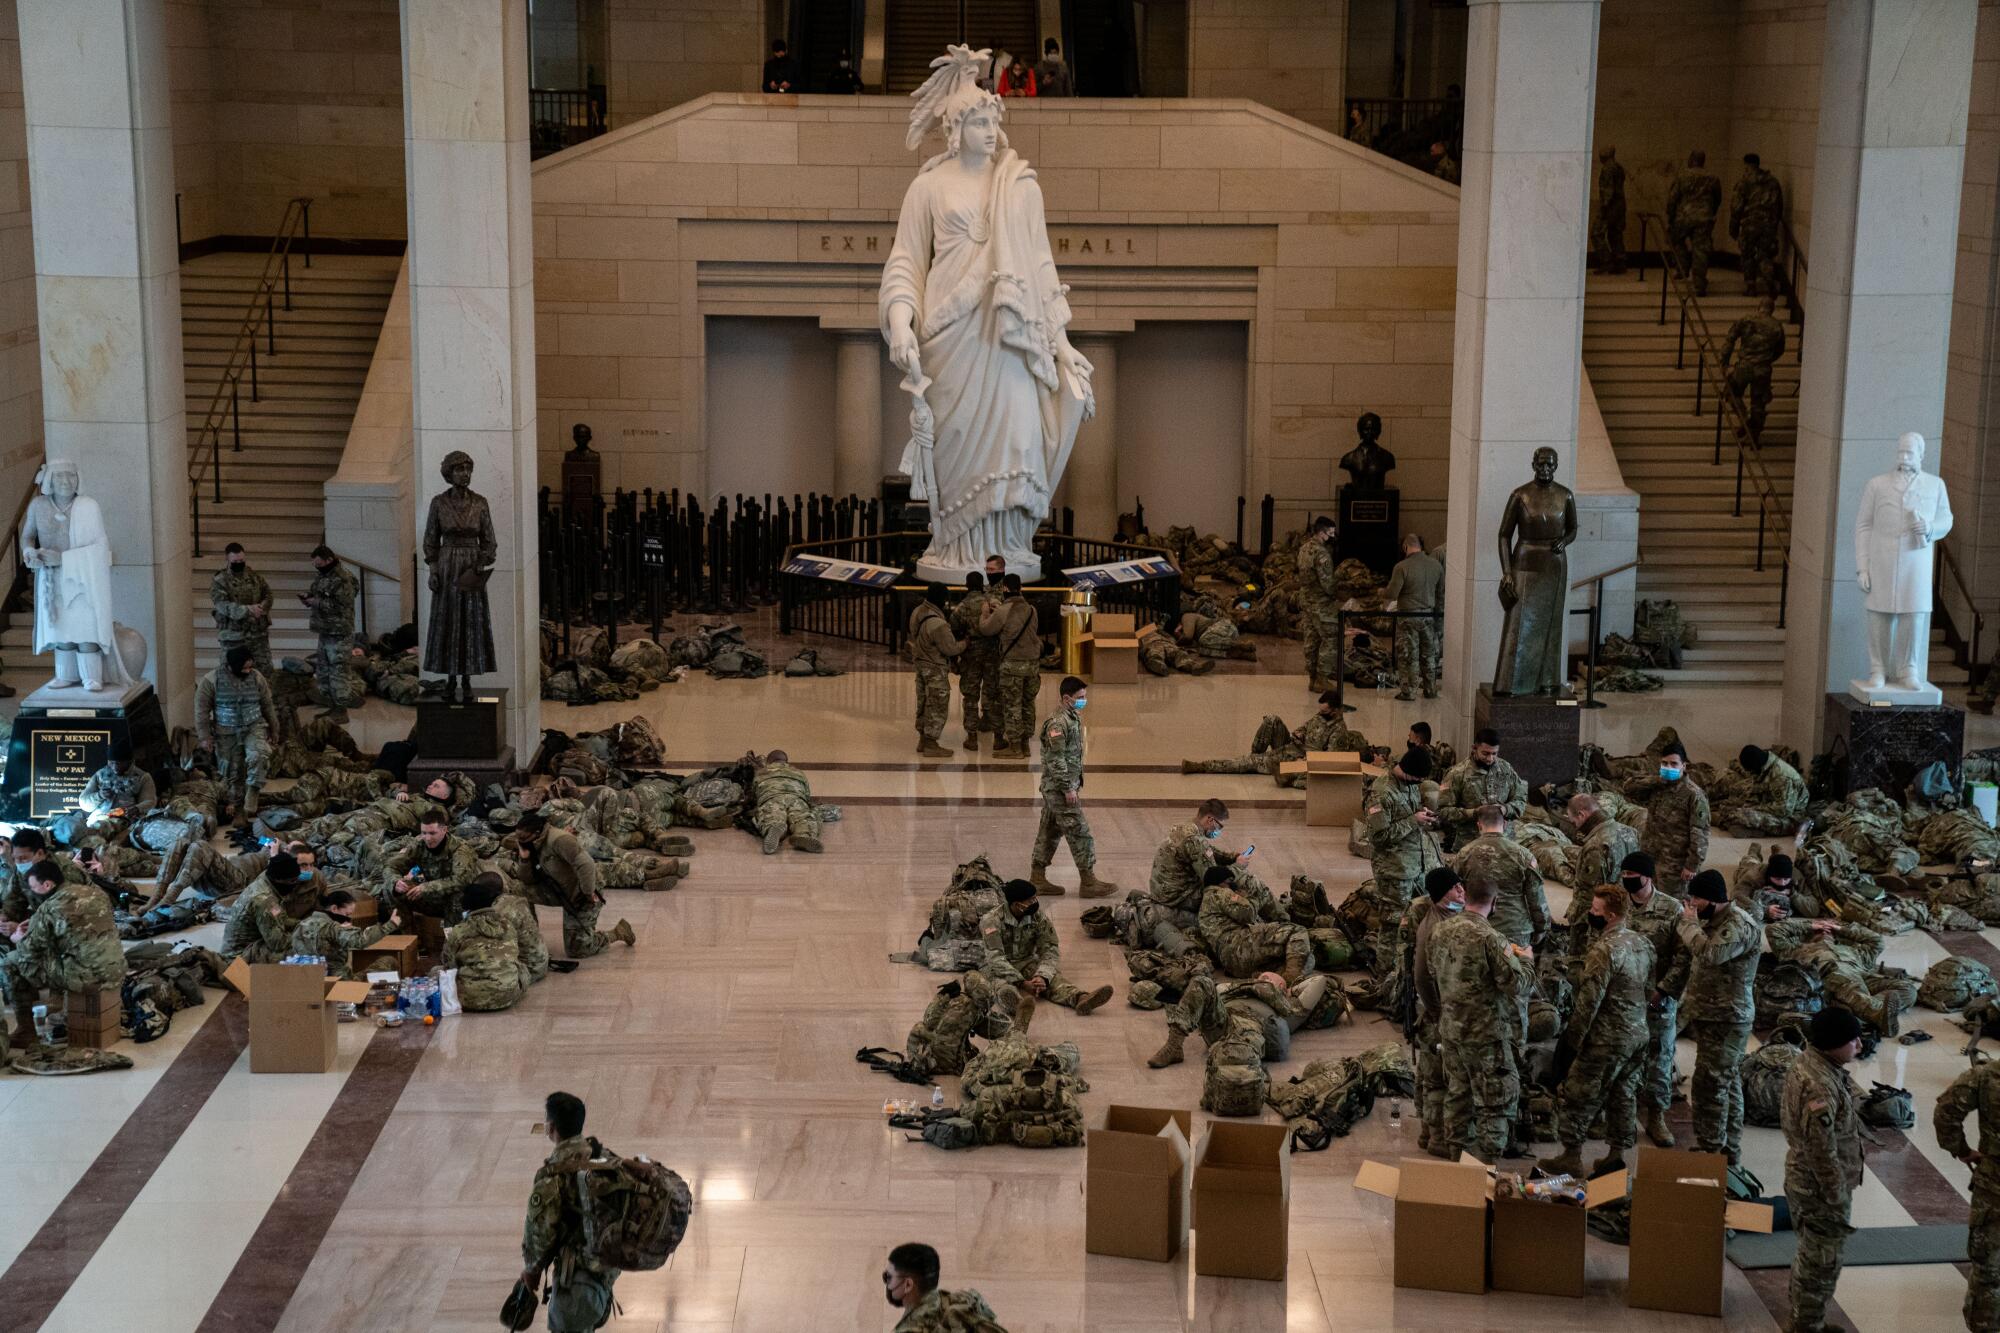 Dozens of troops relax alongside open cardboard boxes and the looming Statue of Freedom plaster cast.